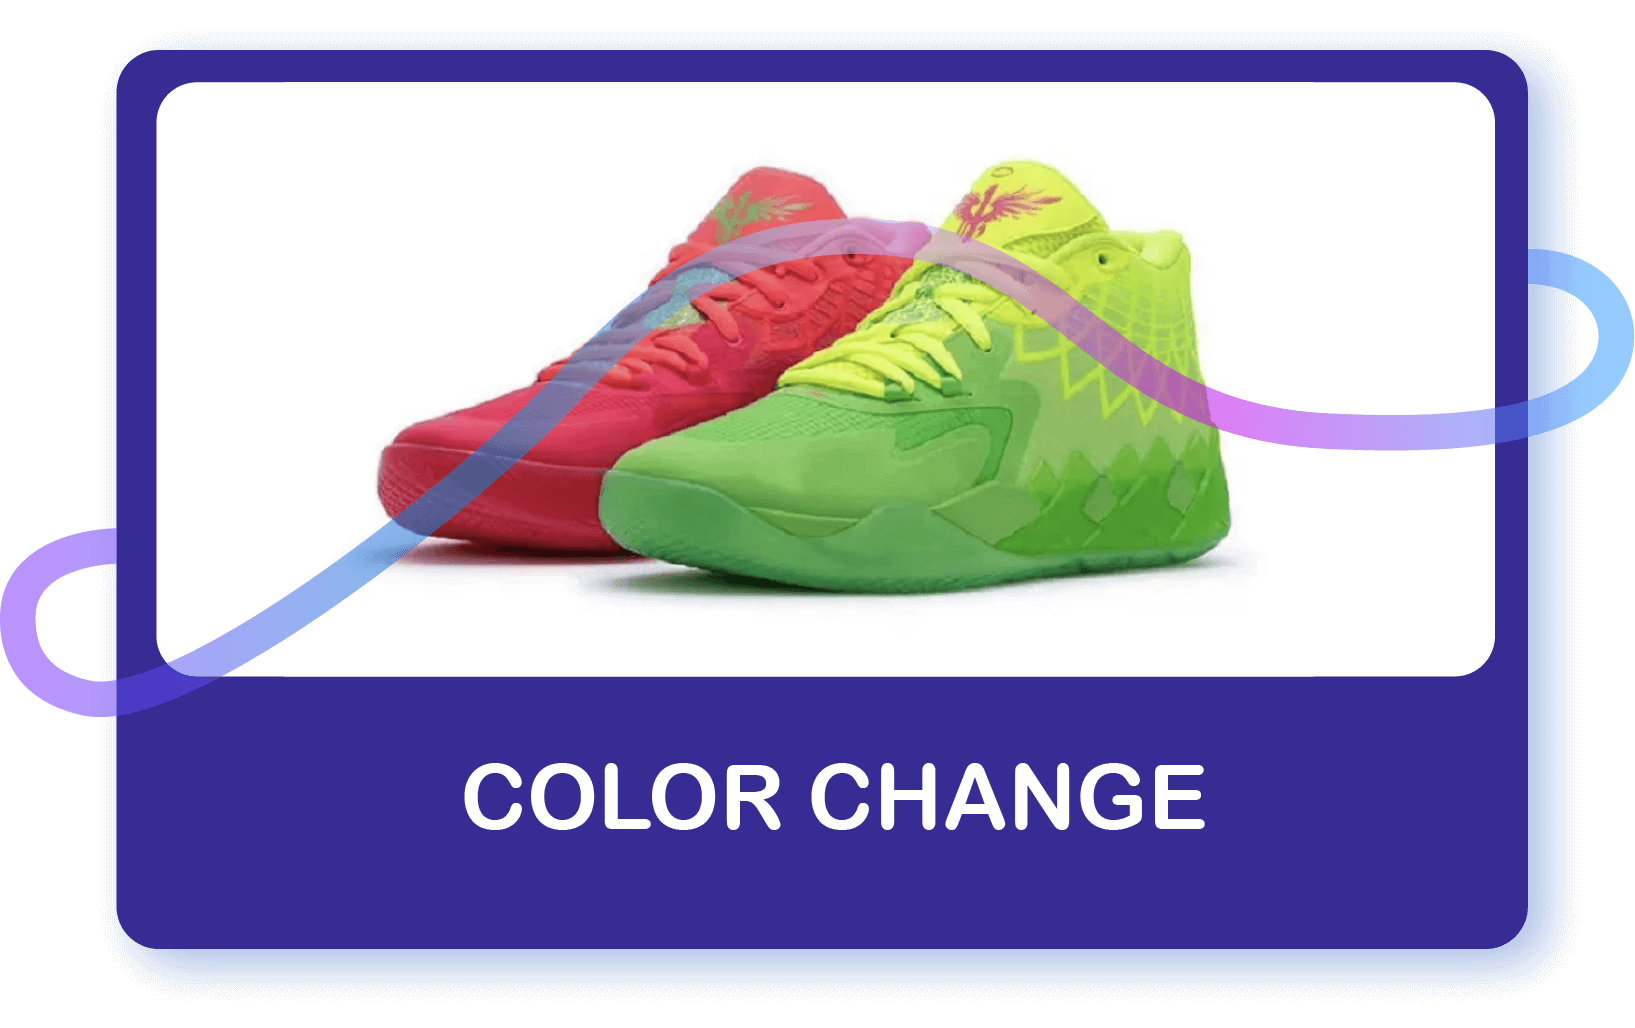 Color changing services in Photoshop refer to the process of altering the color of an object, image, or a particular area in a photograph using various Photoshop tools and techniques. It can be used to enhance the overall color scheme of an image, adjust the hue and saturation of specific colors, or change the color of an object or background entirely.